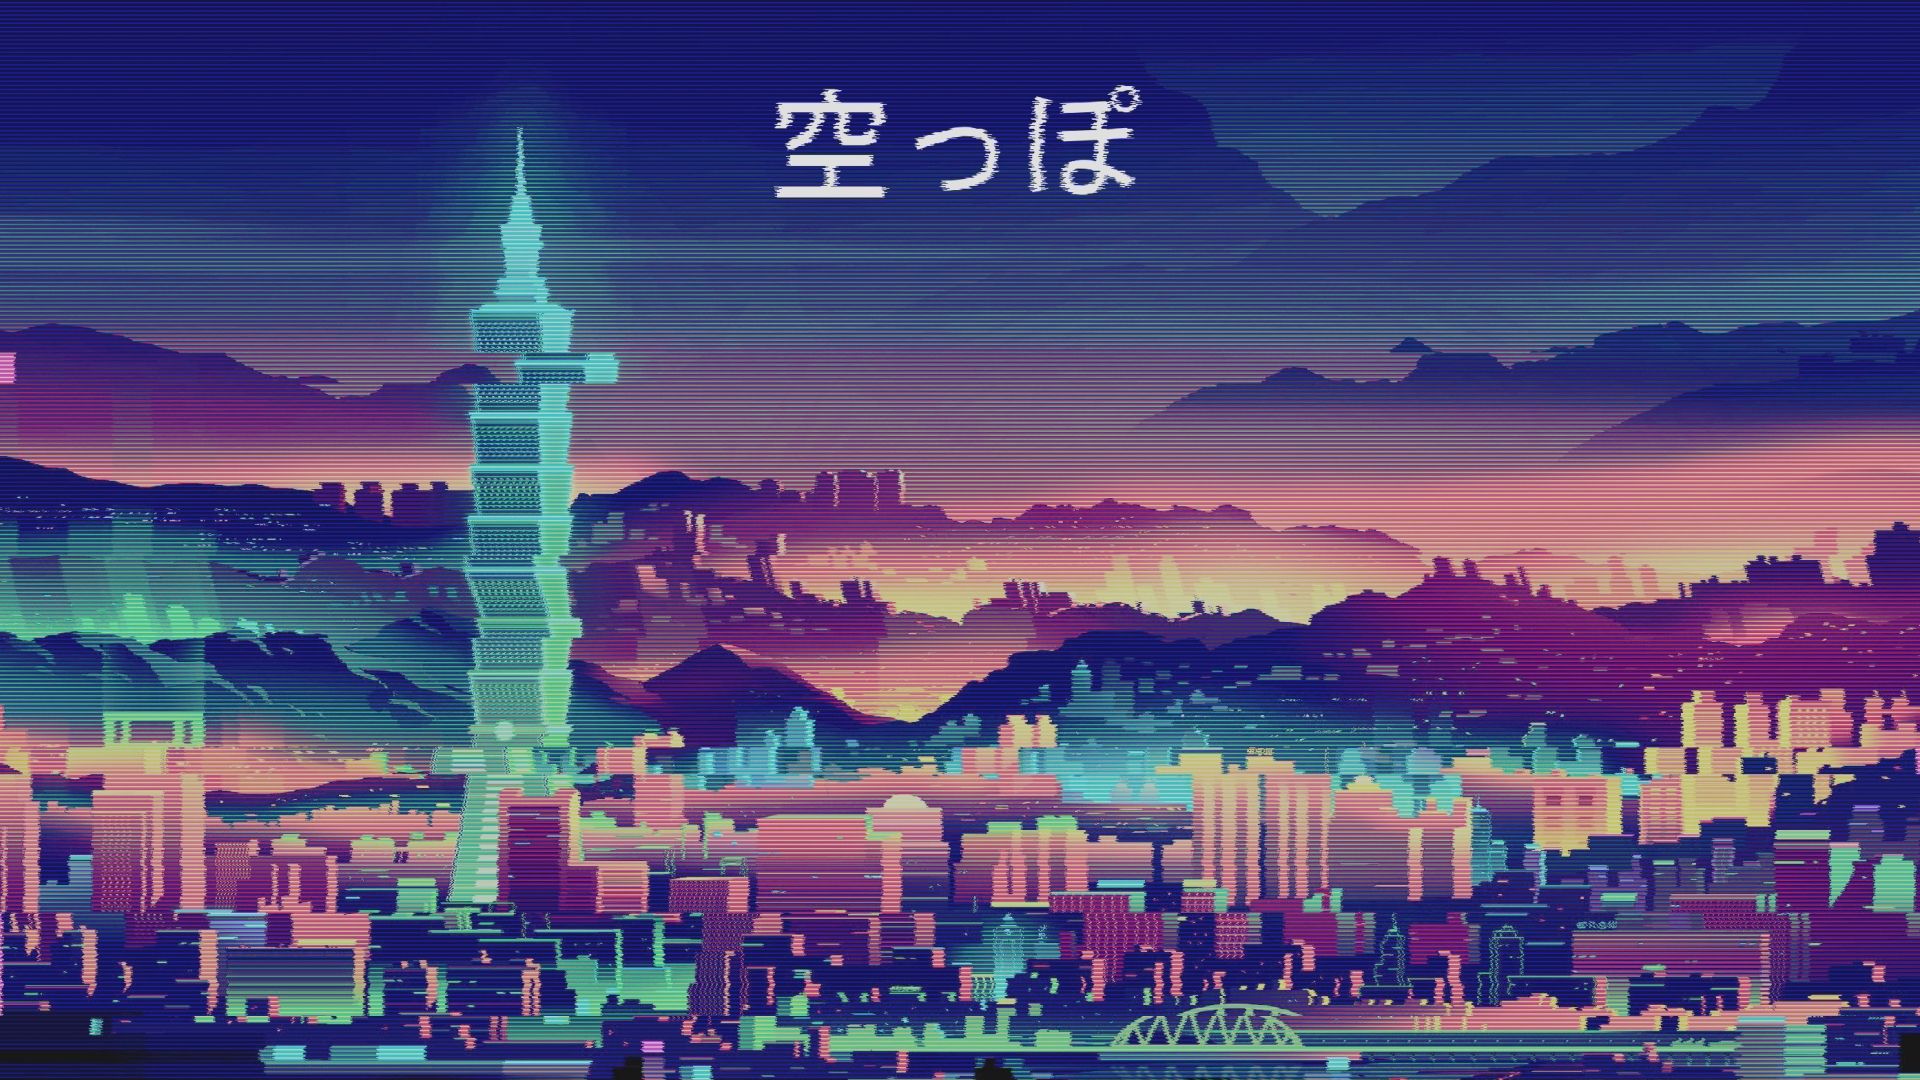 Free download Aesthetic Anime Wallpaper - in Collection